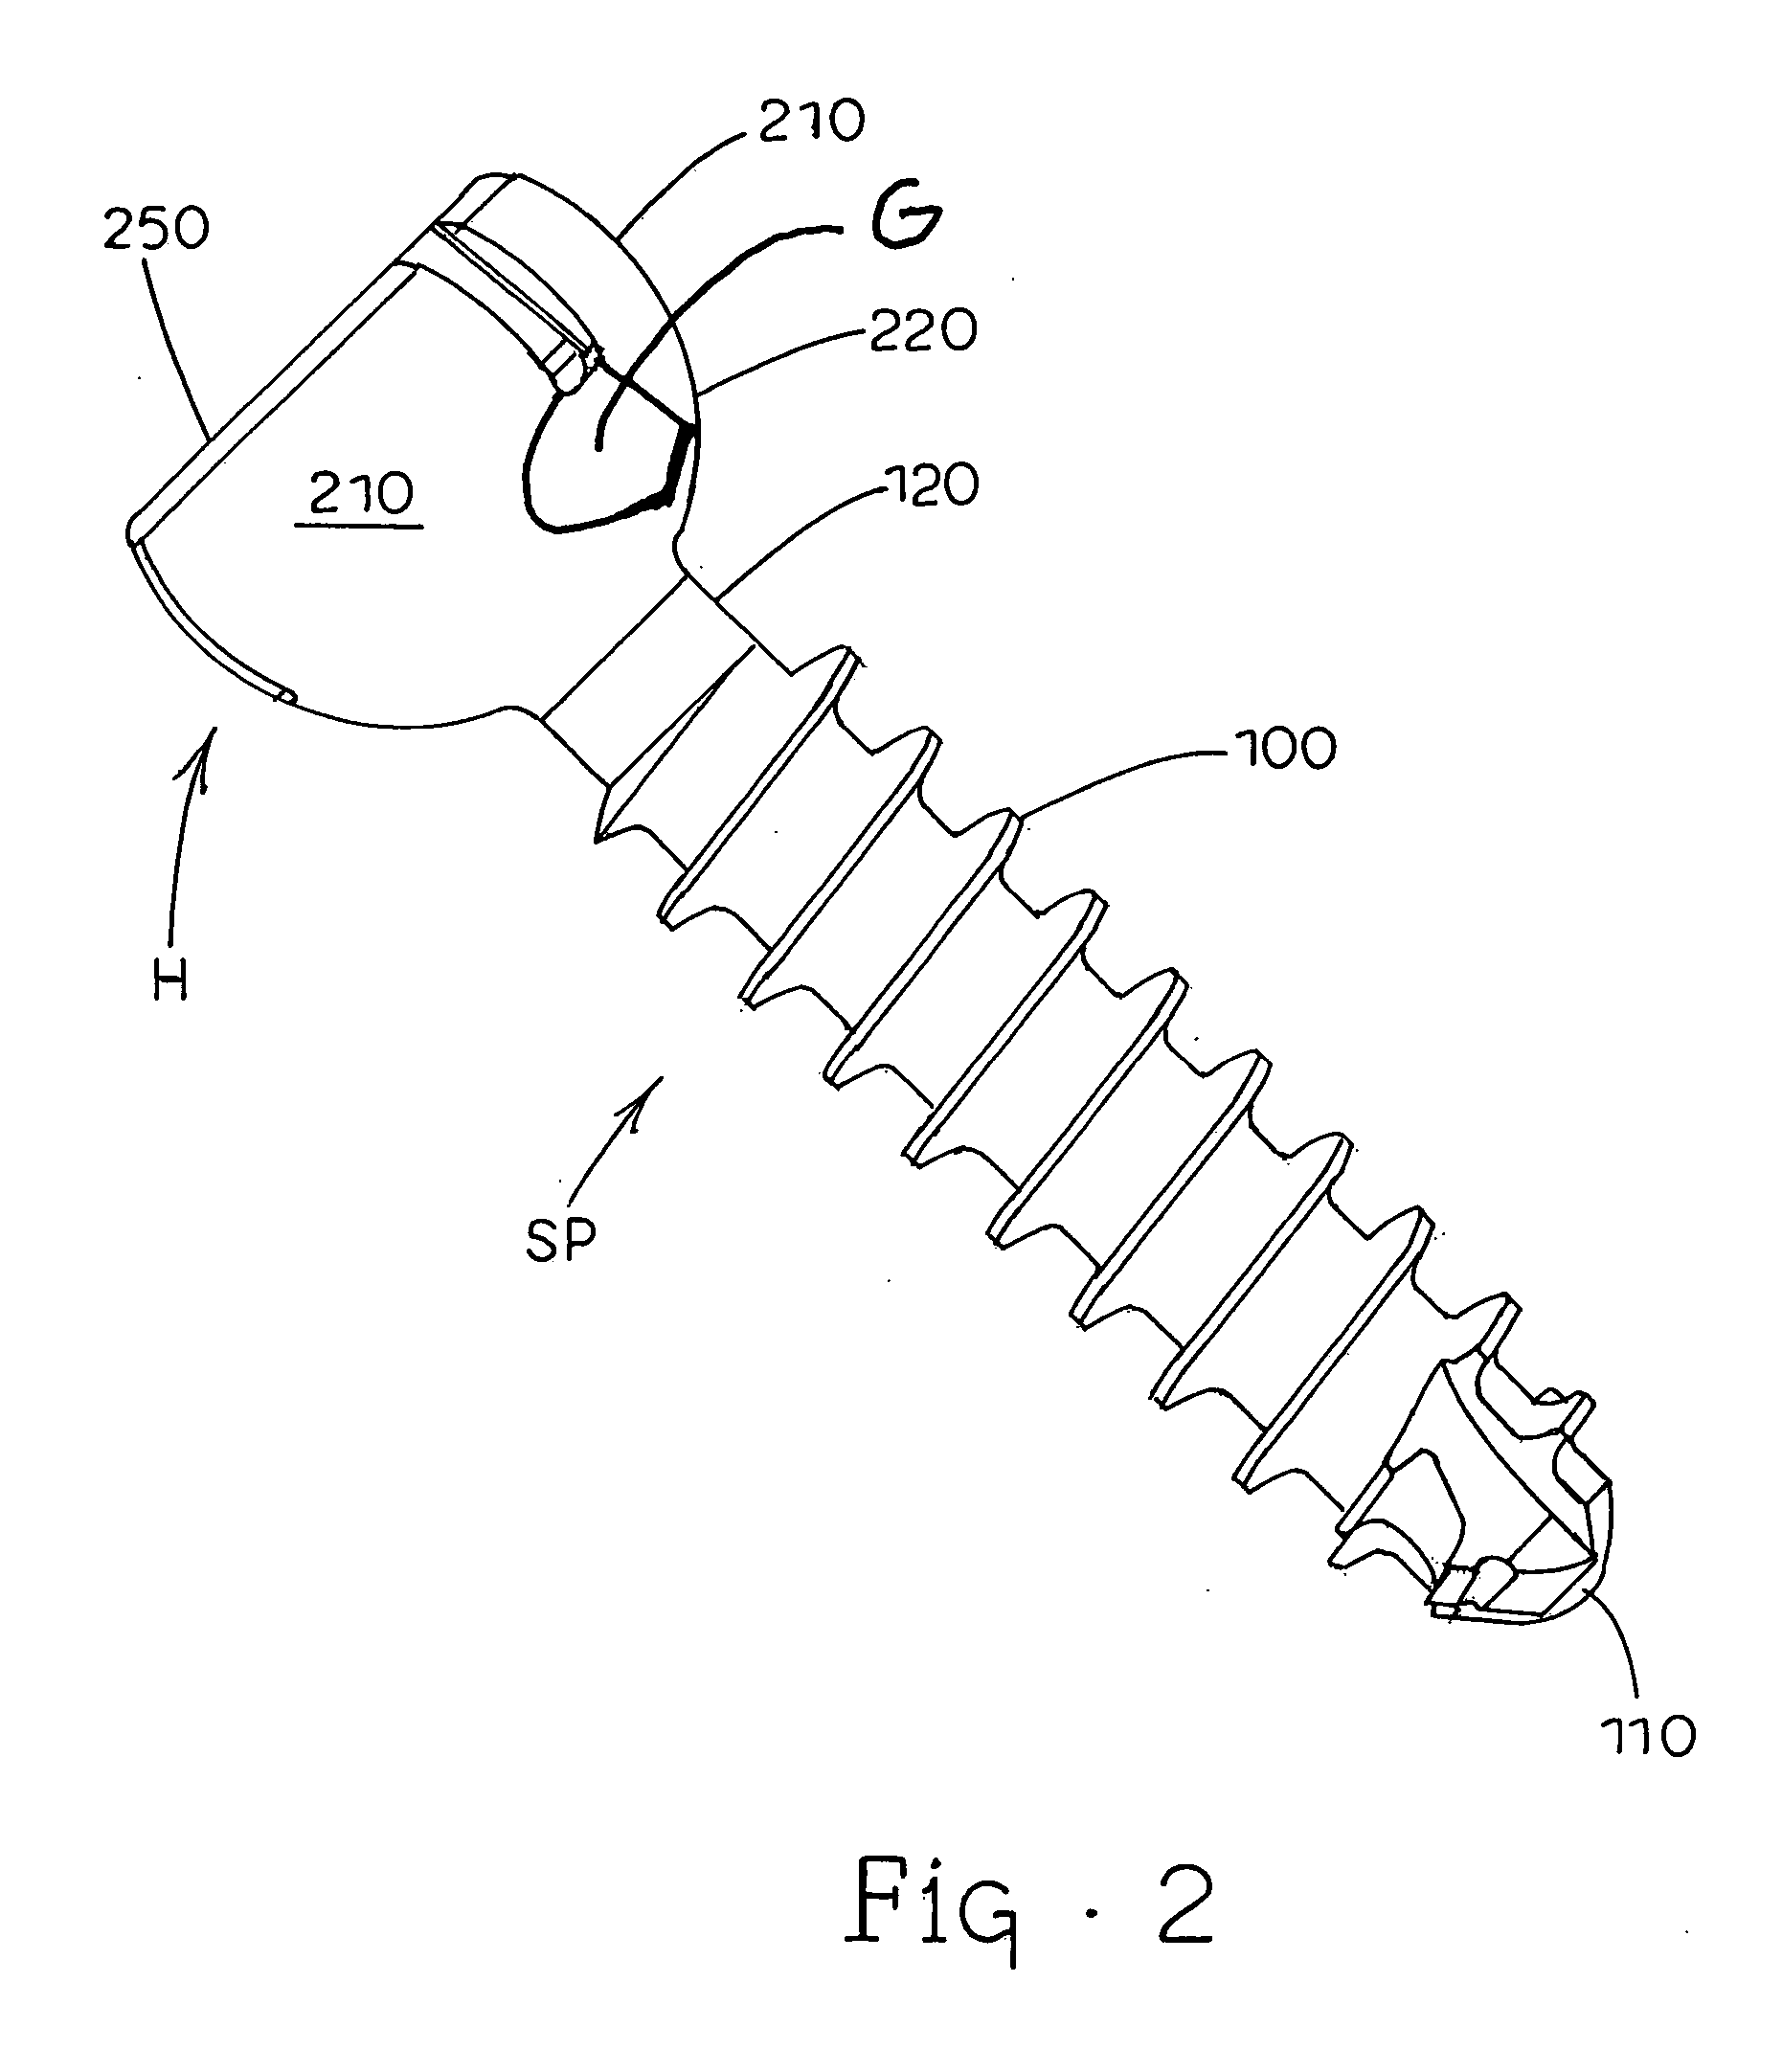 Apparatuses, systems and methods for bone fixation